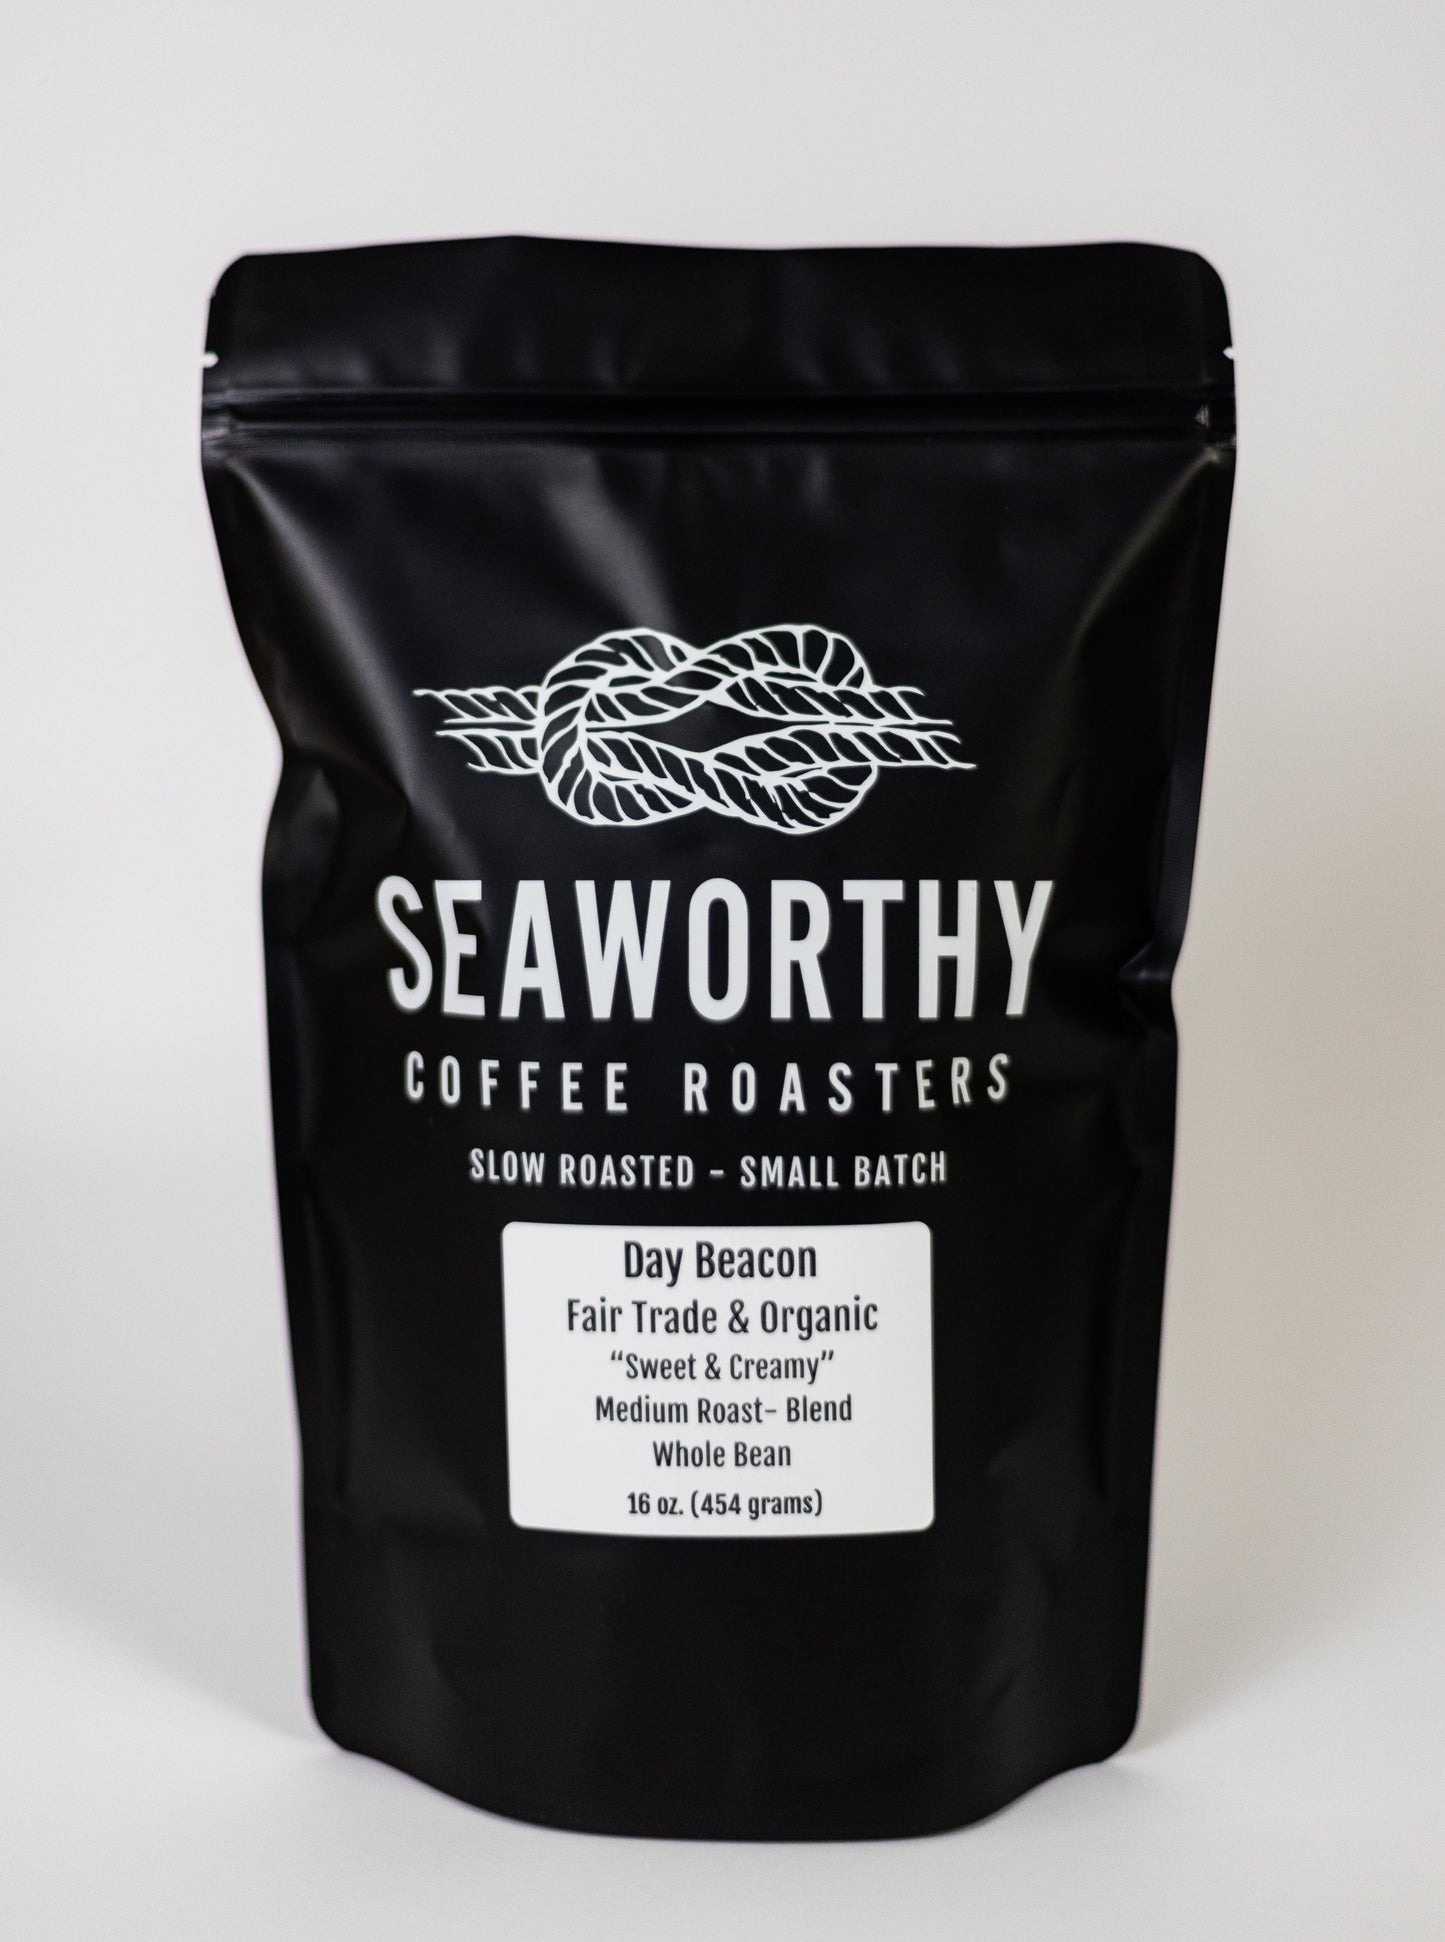 Seaworthy slow roasted, small batch coffee. A Day Beacon is a nautical sea marker, which serves as a daytime aid to navigation and we know this tasty blend will become your Day Beacon in no time! This smooth Seaworthy Signature blend features notes of graham crackers, vanilla, with some light fruity tones in the backdrop. It has a mild acidity, a clean taste, and a delightfully creamy body.